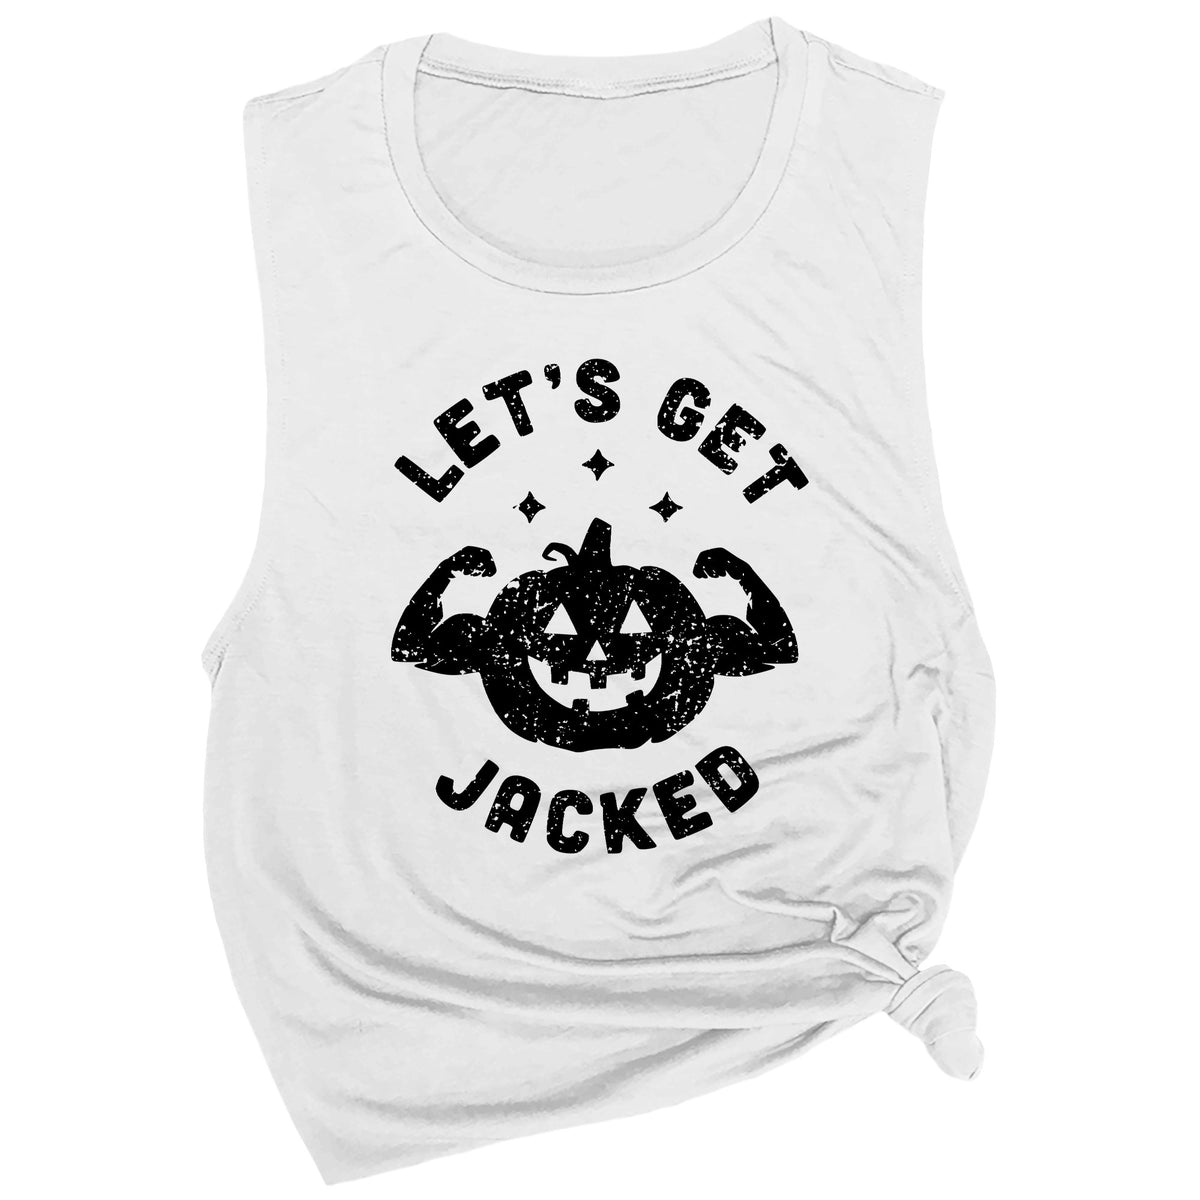 Let's Get Jacked Muscle Tee